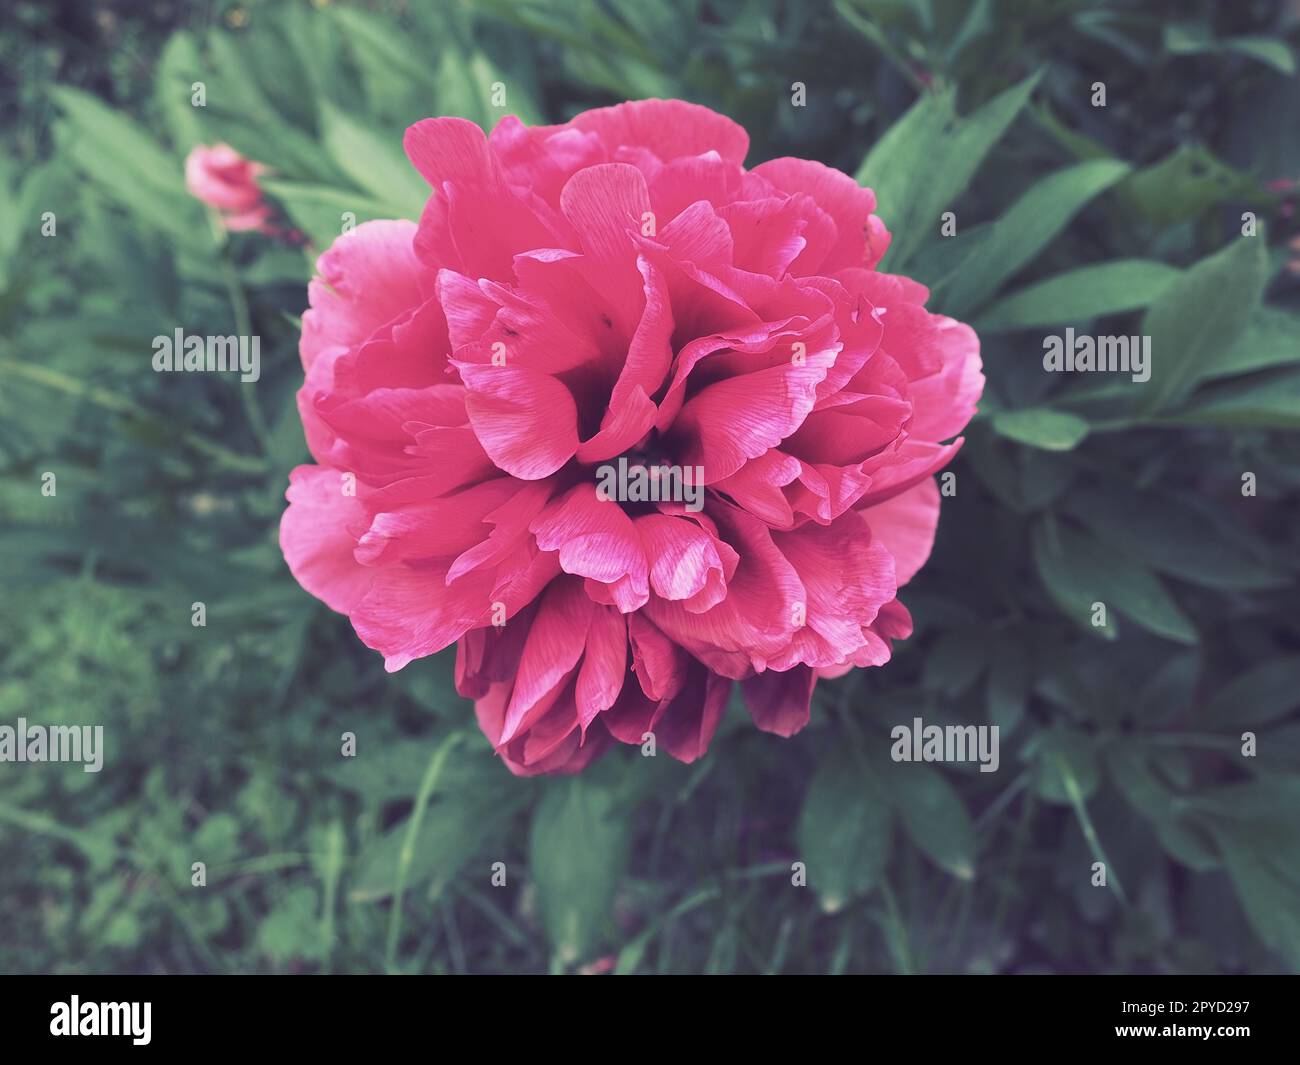 Red-pink peonies. Beautiful large peony flowers against a background of green foliage and grass. Floristics, floriculture and gardening as a hobby Stock Photo